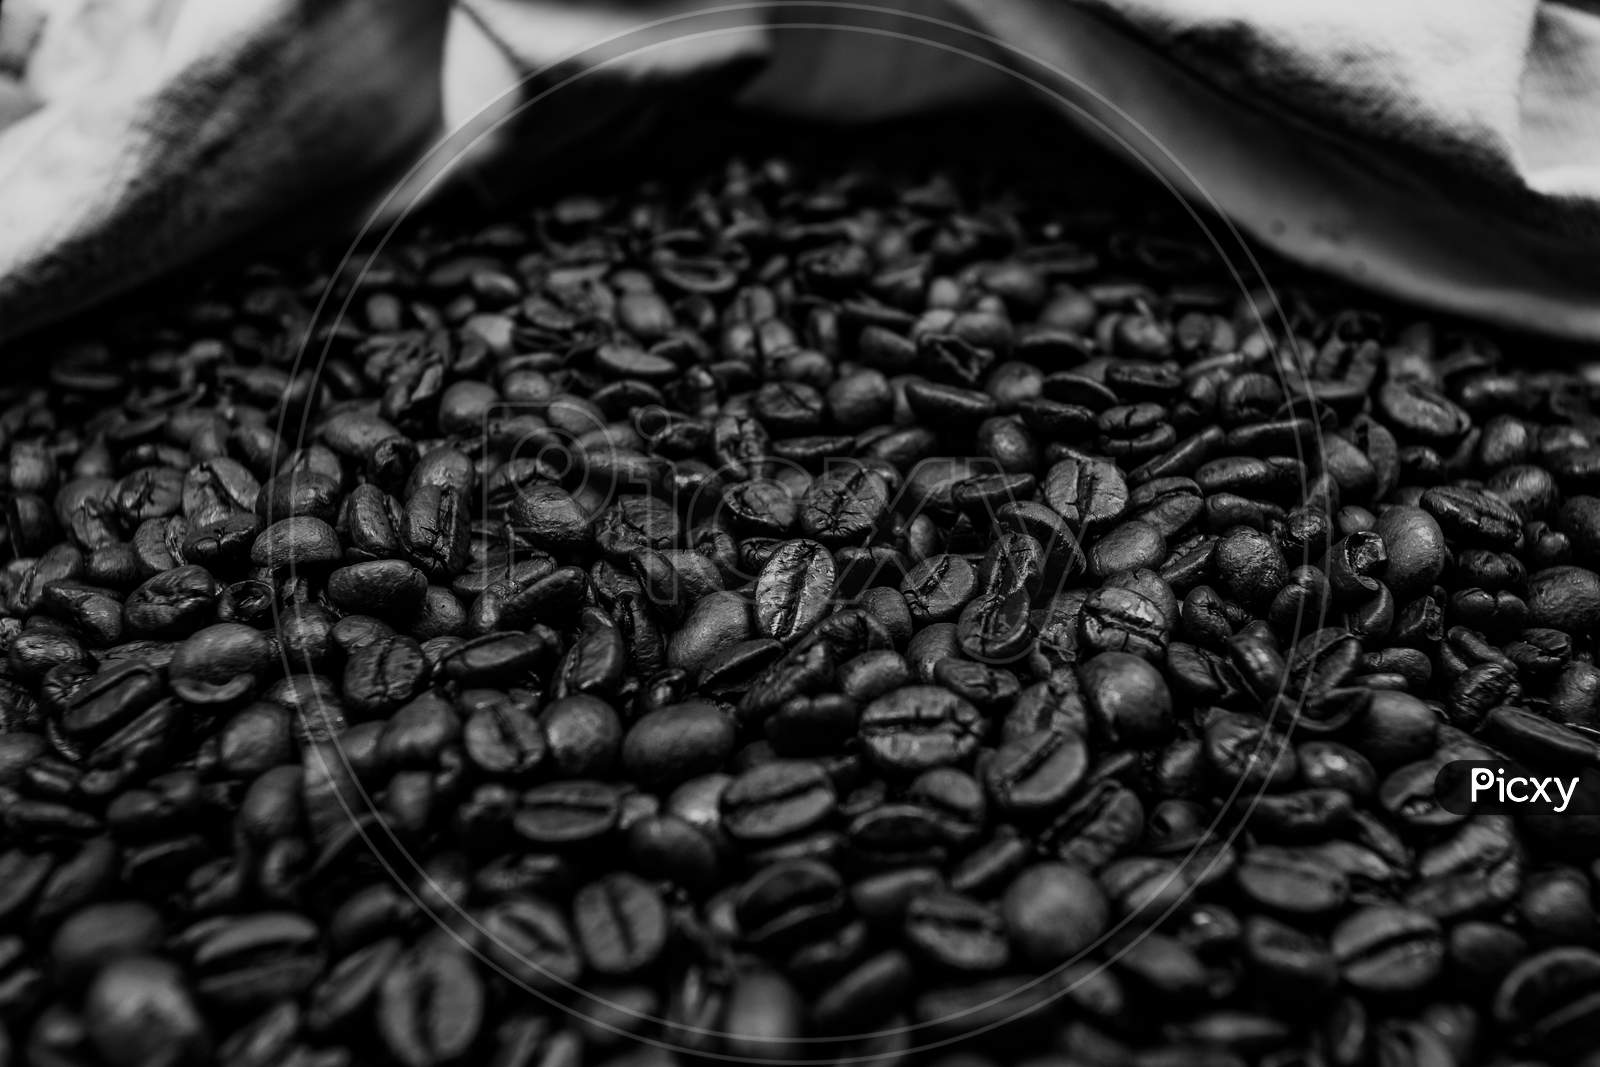 A Black And White Close Up Of A Lot Of Coffee Grain